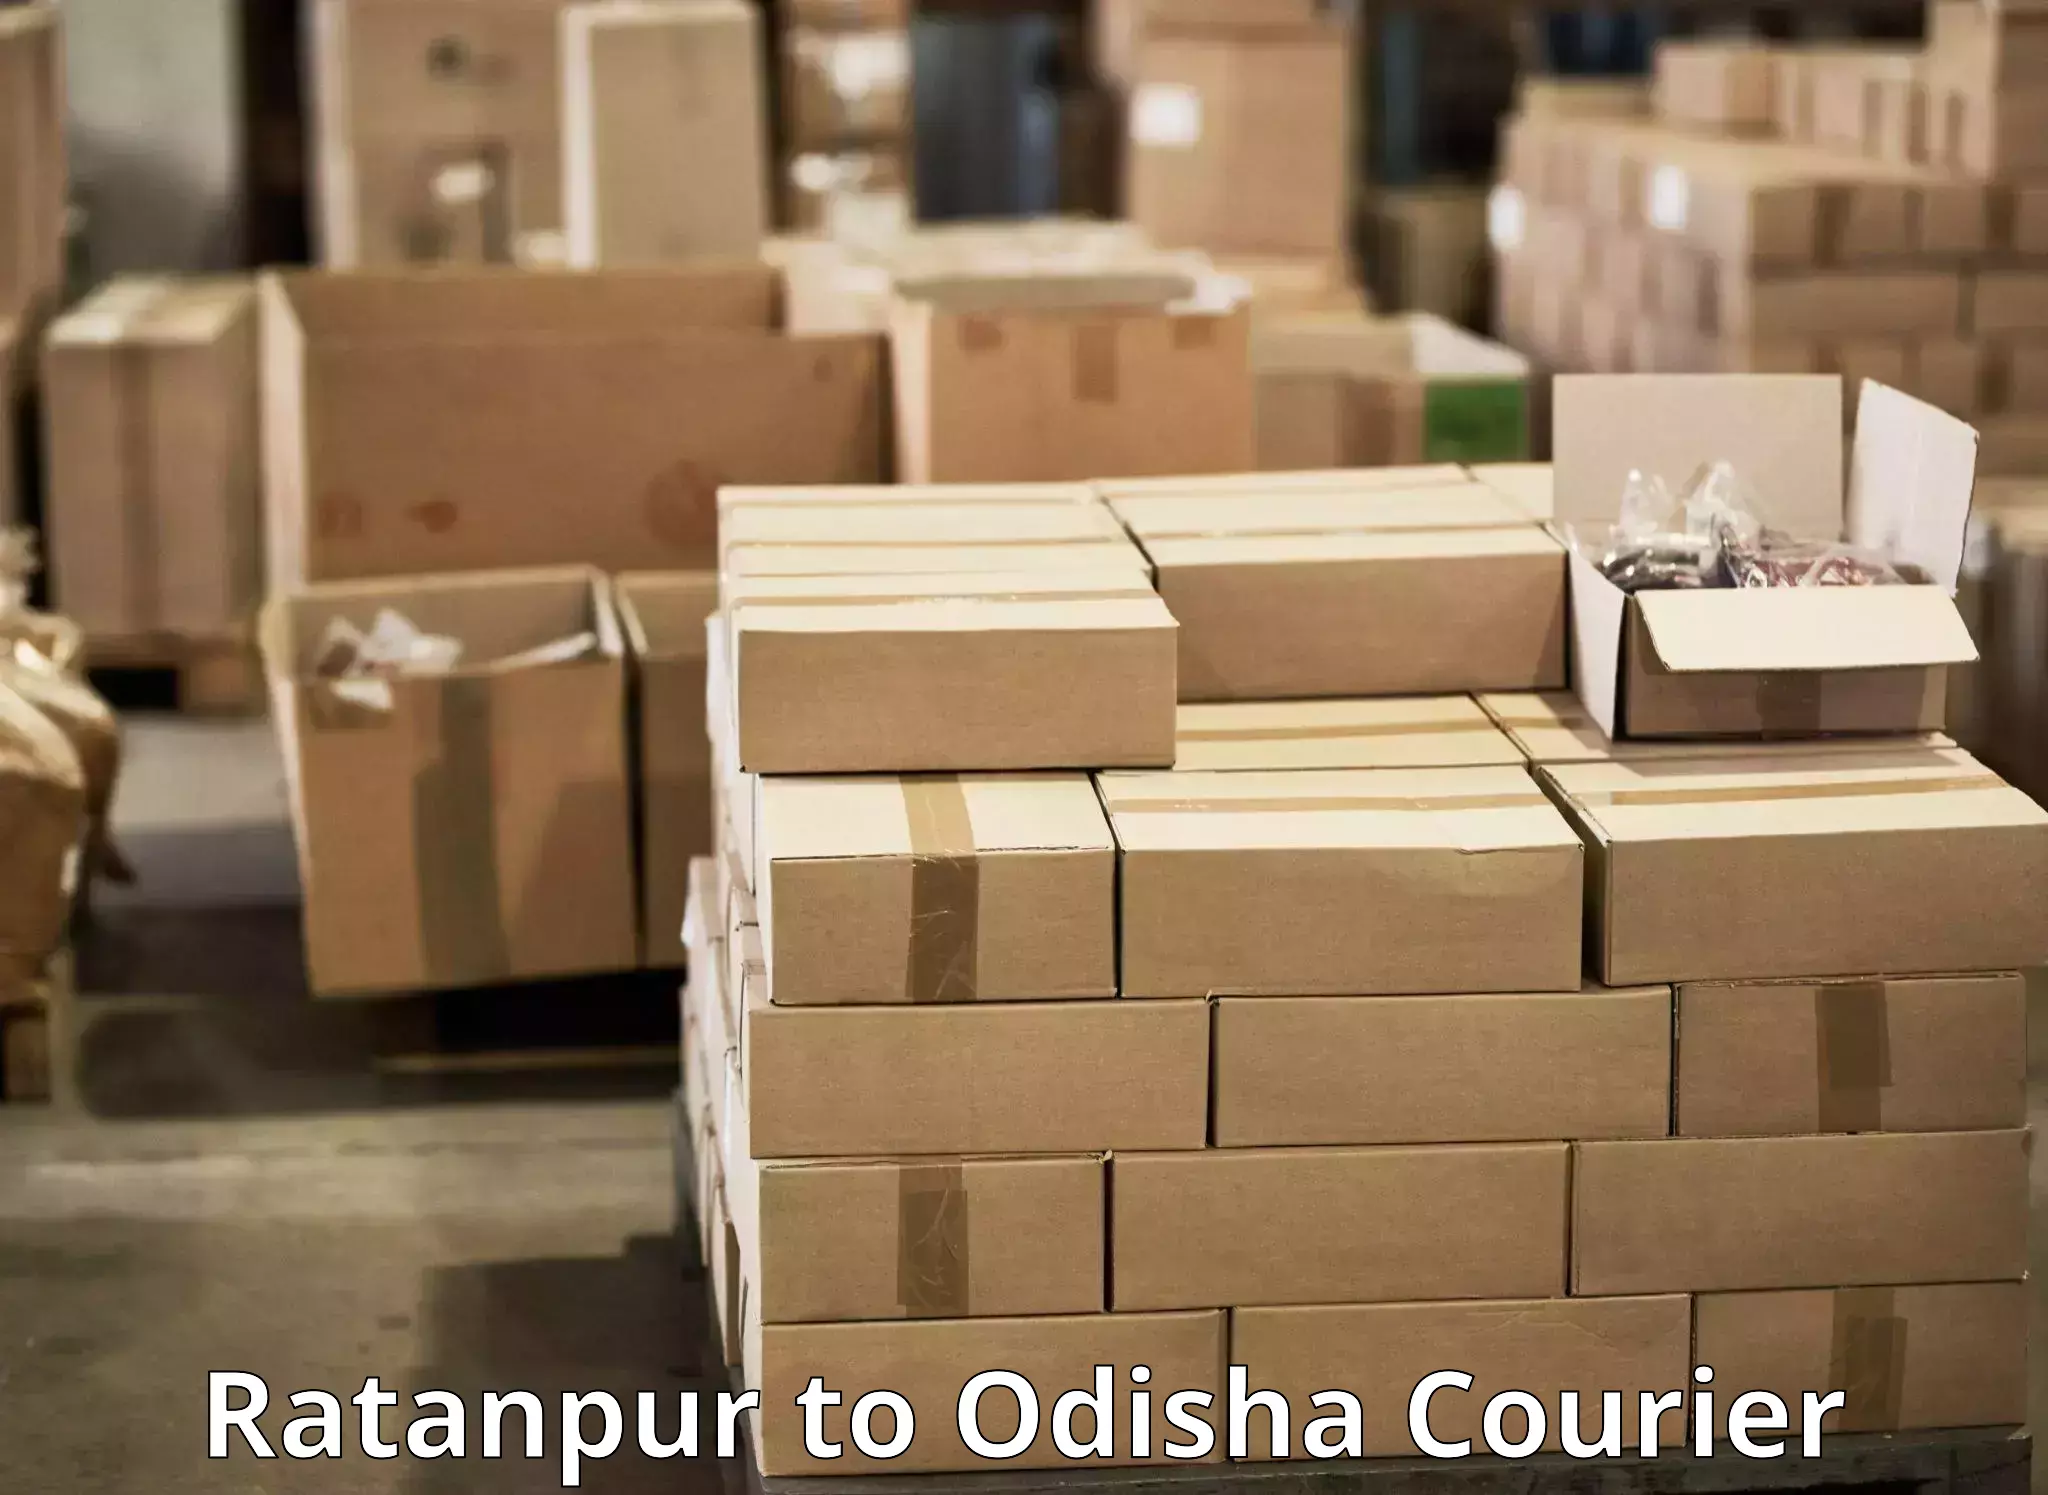 Weekend courier service in Ratanpur to Angul